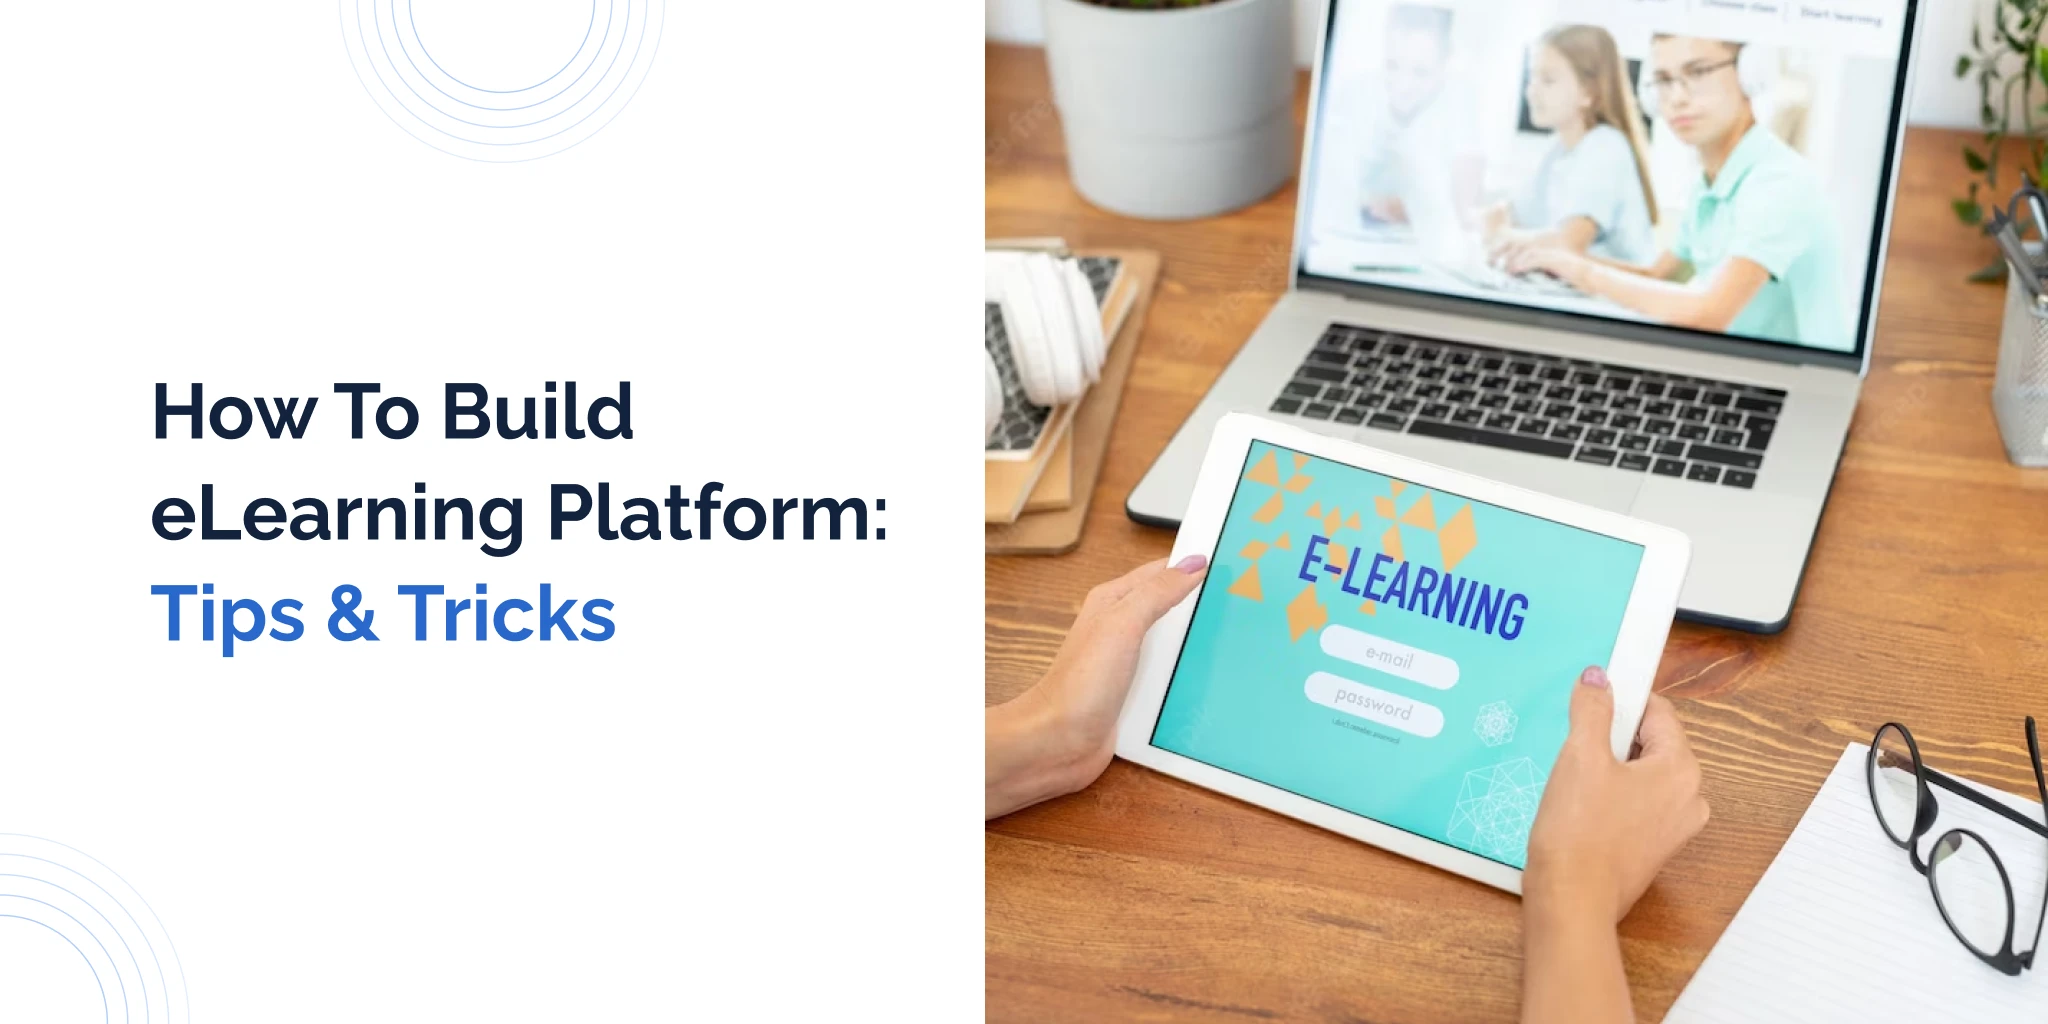 How to build eLearning platform